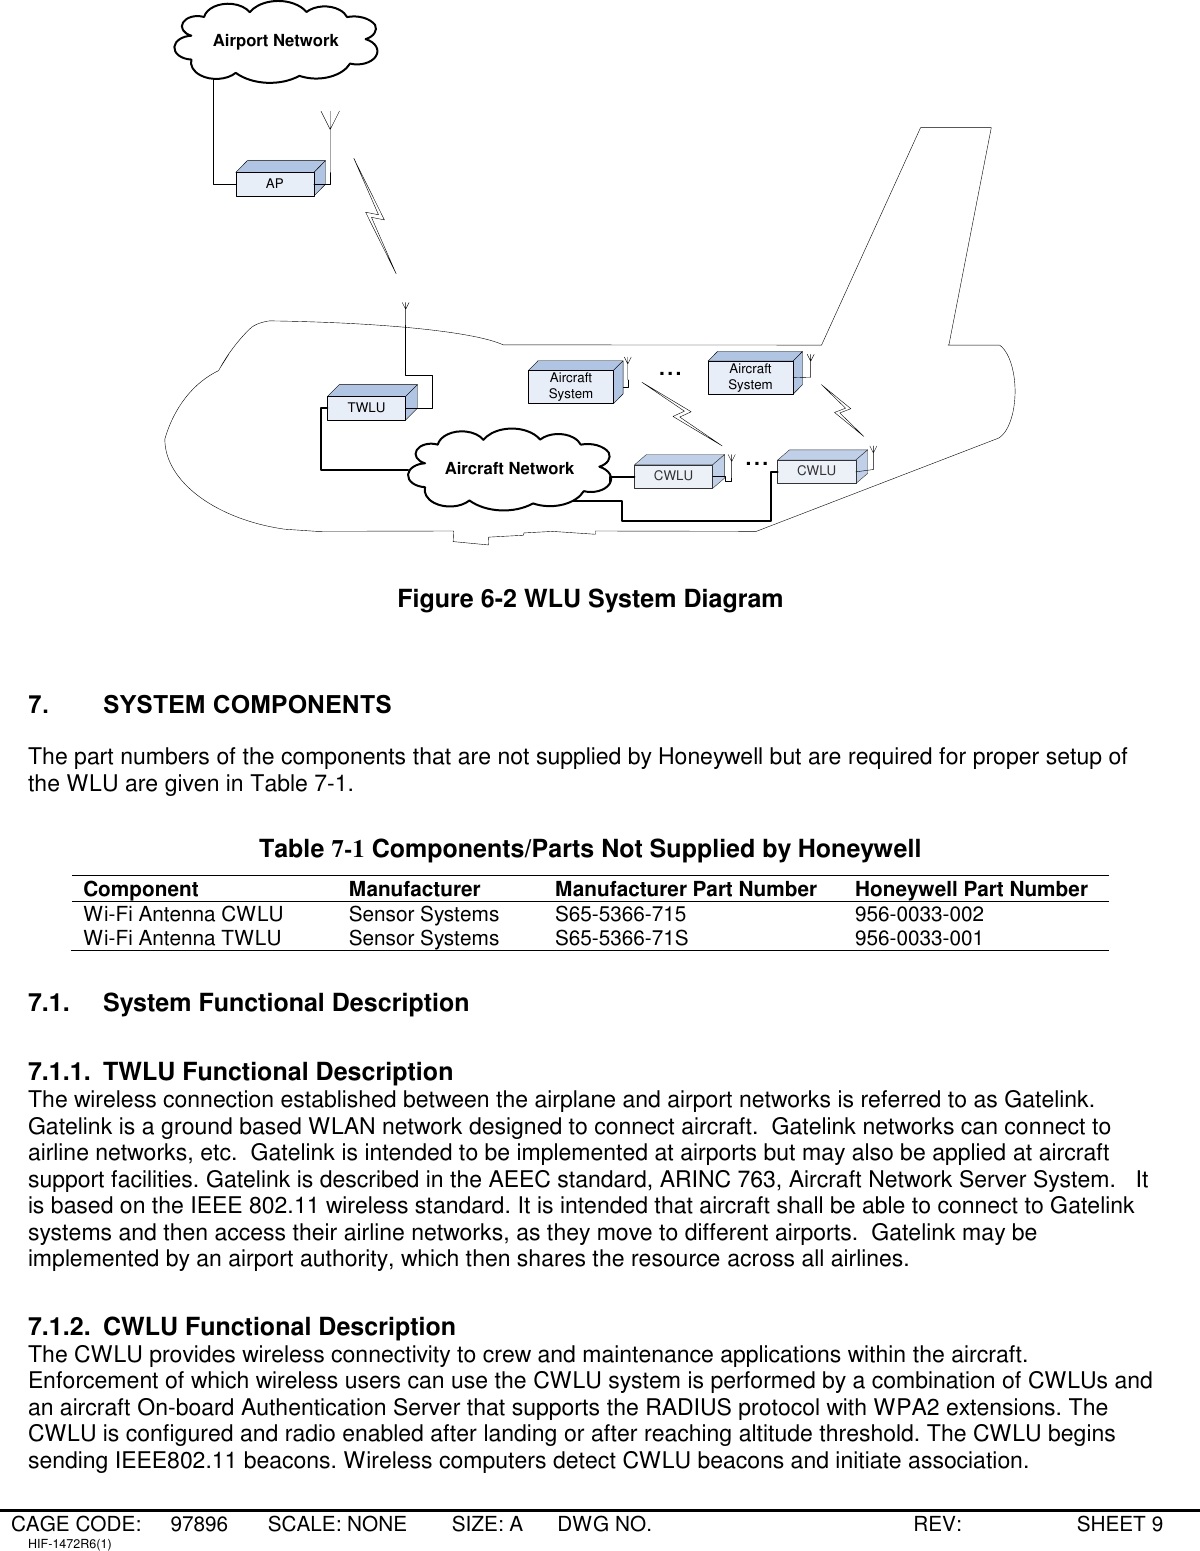 CAGE CODE: 97896 SCALE: NONE   SIZE: A DWG NO.   REV:   SHEET 9 HIF-1472R6(1) CWLUCWLUTWLU...APAircraft NetworkAirport NetworkAircraft System...Aircraft System Figure 6-2 WLU System Diagram   7. SYSTEM COMPONENTS  The part numbers of the components that are not supplied by Honeywell but are required for proper setup of the WLU are given in Table 7-1.  Table 7-1 Components/Parts Not Supplied by Honeywell Component Manufacturer  Manufacturer Part Number Honeywell Part Number Wi-Fi Antenna CWLU Sensor Systems S65-5366-715 956-0033-002 Wi-Fi Antenna TWLU Sensor Systems S65-5366-71S 956-0033-001  7.1.  System Functional Description  7.1.1.  TWLU Functional Description The wireless connection established between the airplane and airport networks is referred to as Gatelink. Gatelink is a ground based WLAN network designed to connect aircraft.  Gatelink networks can connect to airline networks, etc.  Gatelink is intended to be implemented at airports but may also be applied at aircraft support facilities. Gatelink is described in the AEEC standard, ARINC 763, Aircraft Network Server System.   It is based on the IEEE 802.11 wireless standard. It is intended that aircraft shall be able to connect to Gatelink systems and then access their airline networks, as they move to different airports.  Gatelink may be implemented by an airport authority, which then shares the resource across all airlines.  7.1.2.  CWLU Functional Description The CWLU provides wireless connectivity to crew and maintenance applications within the aircraft. Enforcement of which wireless users can use the CWLU system is performed by a combination of CWLUs and an aircraft On-board Authentication Server that supports the RADIUS protocol with WPA2 extensions. The CWLU is configured and radio enabled after landing or after reaching altitude threshold. The CWLU begins sending IEEE802.11 beacons. Wireless computers detect CWLU beacons and initiate association. 